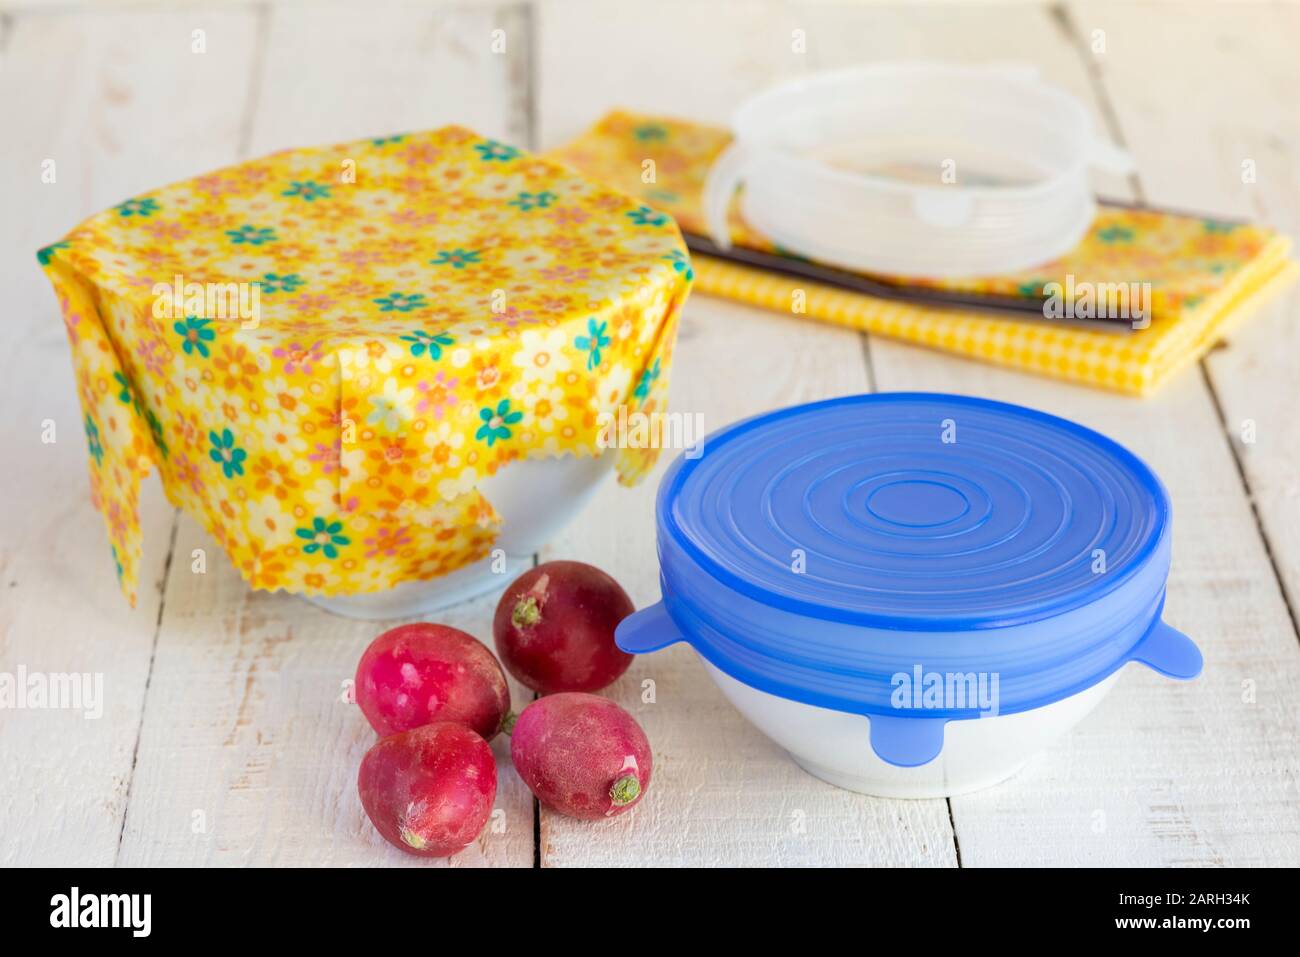 Bowls of food covered with a sustainable, re-usable silicone lid and beeswax wrap. Stock Photo